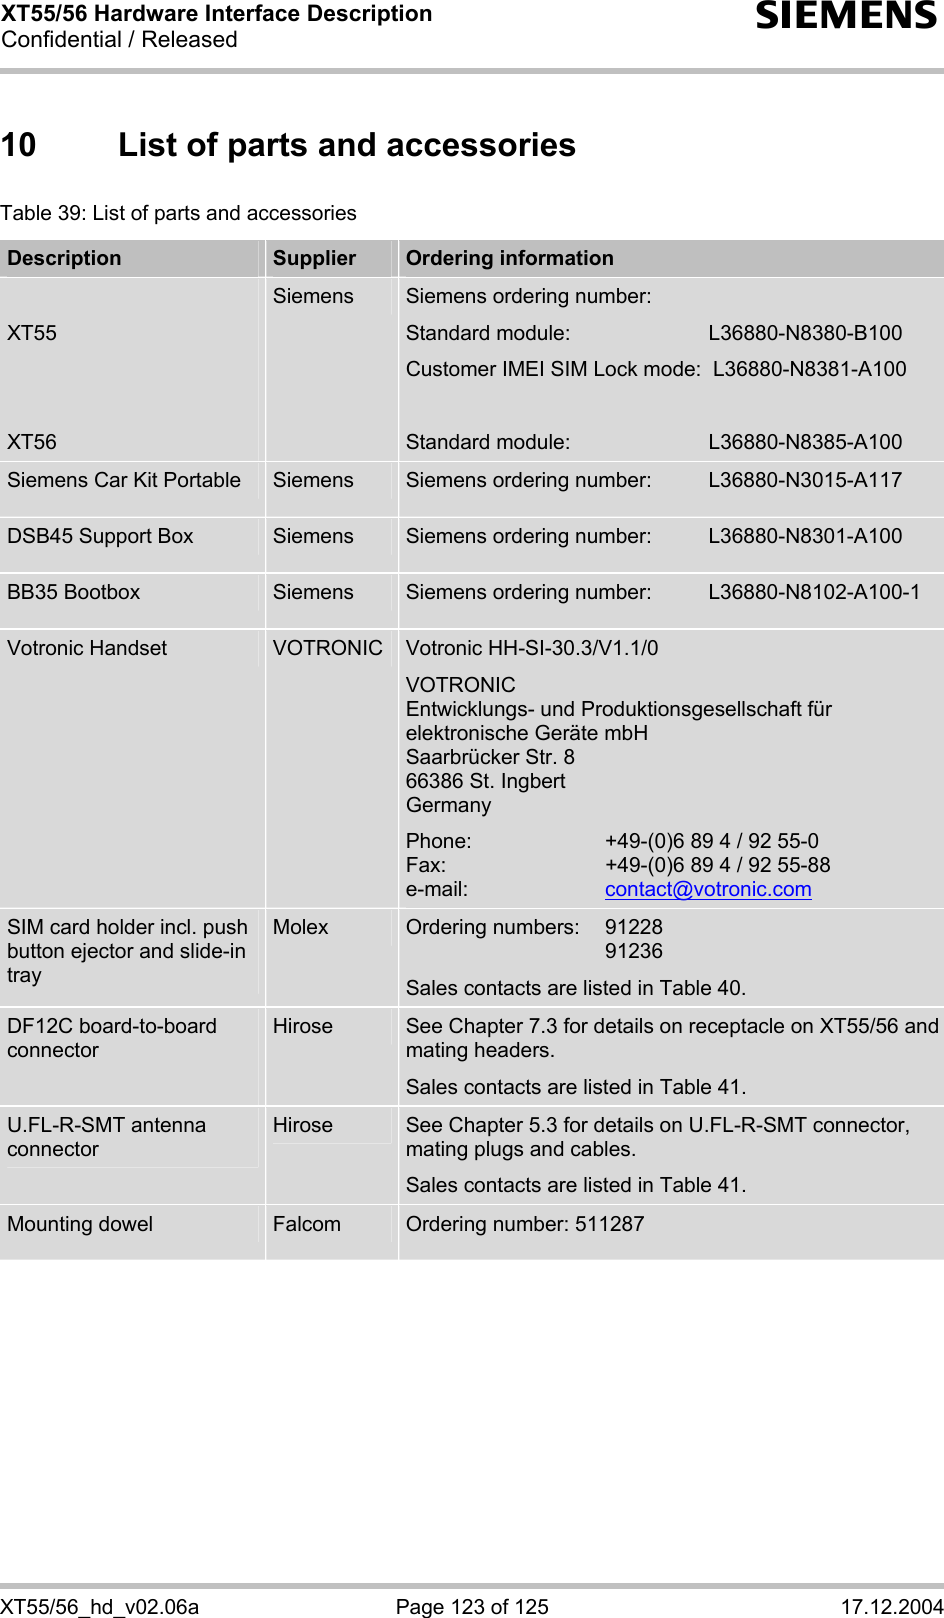 XT55/56 Hardware Interface Description Confidential / Released s XT55/56_hd_v02.06a  Page 123 of 125  17.12.2004 10  List of parts and accessories Table 39: List of parts and accessories Description  Supplier  Ordering information  XT55   XT56 Siemens  Siemens ordering number:  Standard module:   L36880-N8380-B100 Customer IMEI SIM Lock mode:  L36880-N8381-A100  Standard module:   L36880-N8385-A100 Siemens Car Kit Portable  Siemens  Siemens ordering number:   L36880-N3015-A117 DSB45 Support Box  Siemens  Siemens ordering number:   L36880-N8301-A100 BB35 Bootbox   Siemens  Siemens ordering number:   L36880-N8102-A100-1 Votronic Handset  VOTRONIC  Votronic HH-SI-30.3/V1.1/0 VOTRONIC  Entwicklungs- und Produktionsgesellschaft für elektronische Geräte mbH Saarbrücker Str. 8 66386 St. Ingbert Germany Phone:   +49-(0)6 89 4 / 92 55-0 Fax:   +49-(0)6 89 4 / 92 55-88 e-mail:   contact@votronic.com SIM card holder incl. push button ejector and slide-in tray Molex  Ordering numbers:  91228   91236 Sales contacts are listed in Table 40. DF12C board-to-board connector  Hirose  See Chapter 7.3 for details on receptacle on XT55/56 and mating headers. Sales contacts are listed in Table 41. U.FL-R-SMT antenna connector Hirose  See Chapter 5.3 for details on U.FL-R-SMT connector, mating plugs and cables. Sales contacts are listed in Table 41. Mounting dowel  Falcom  Ordering number: 511287 